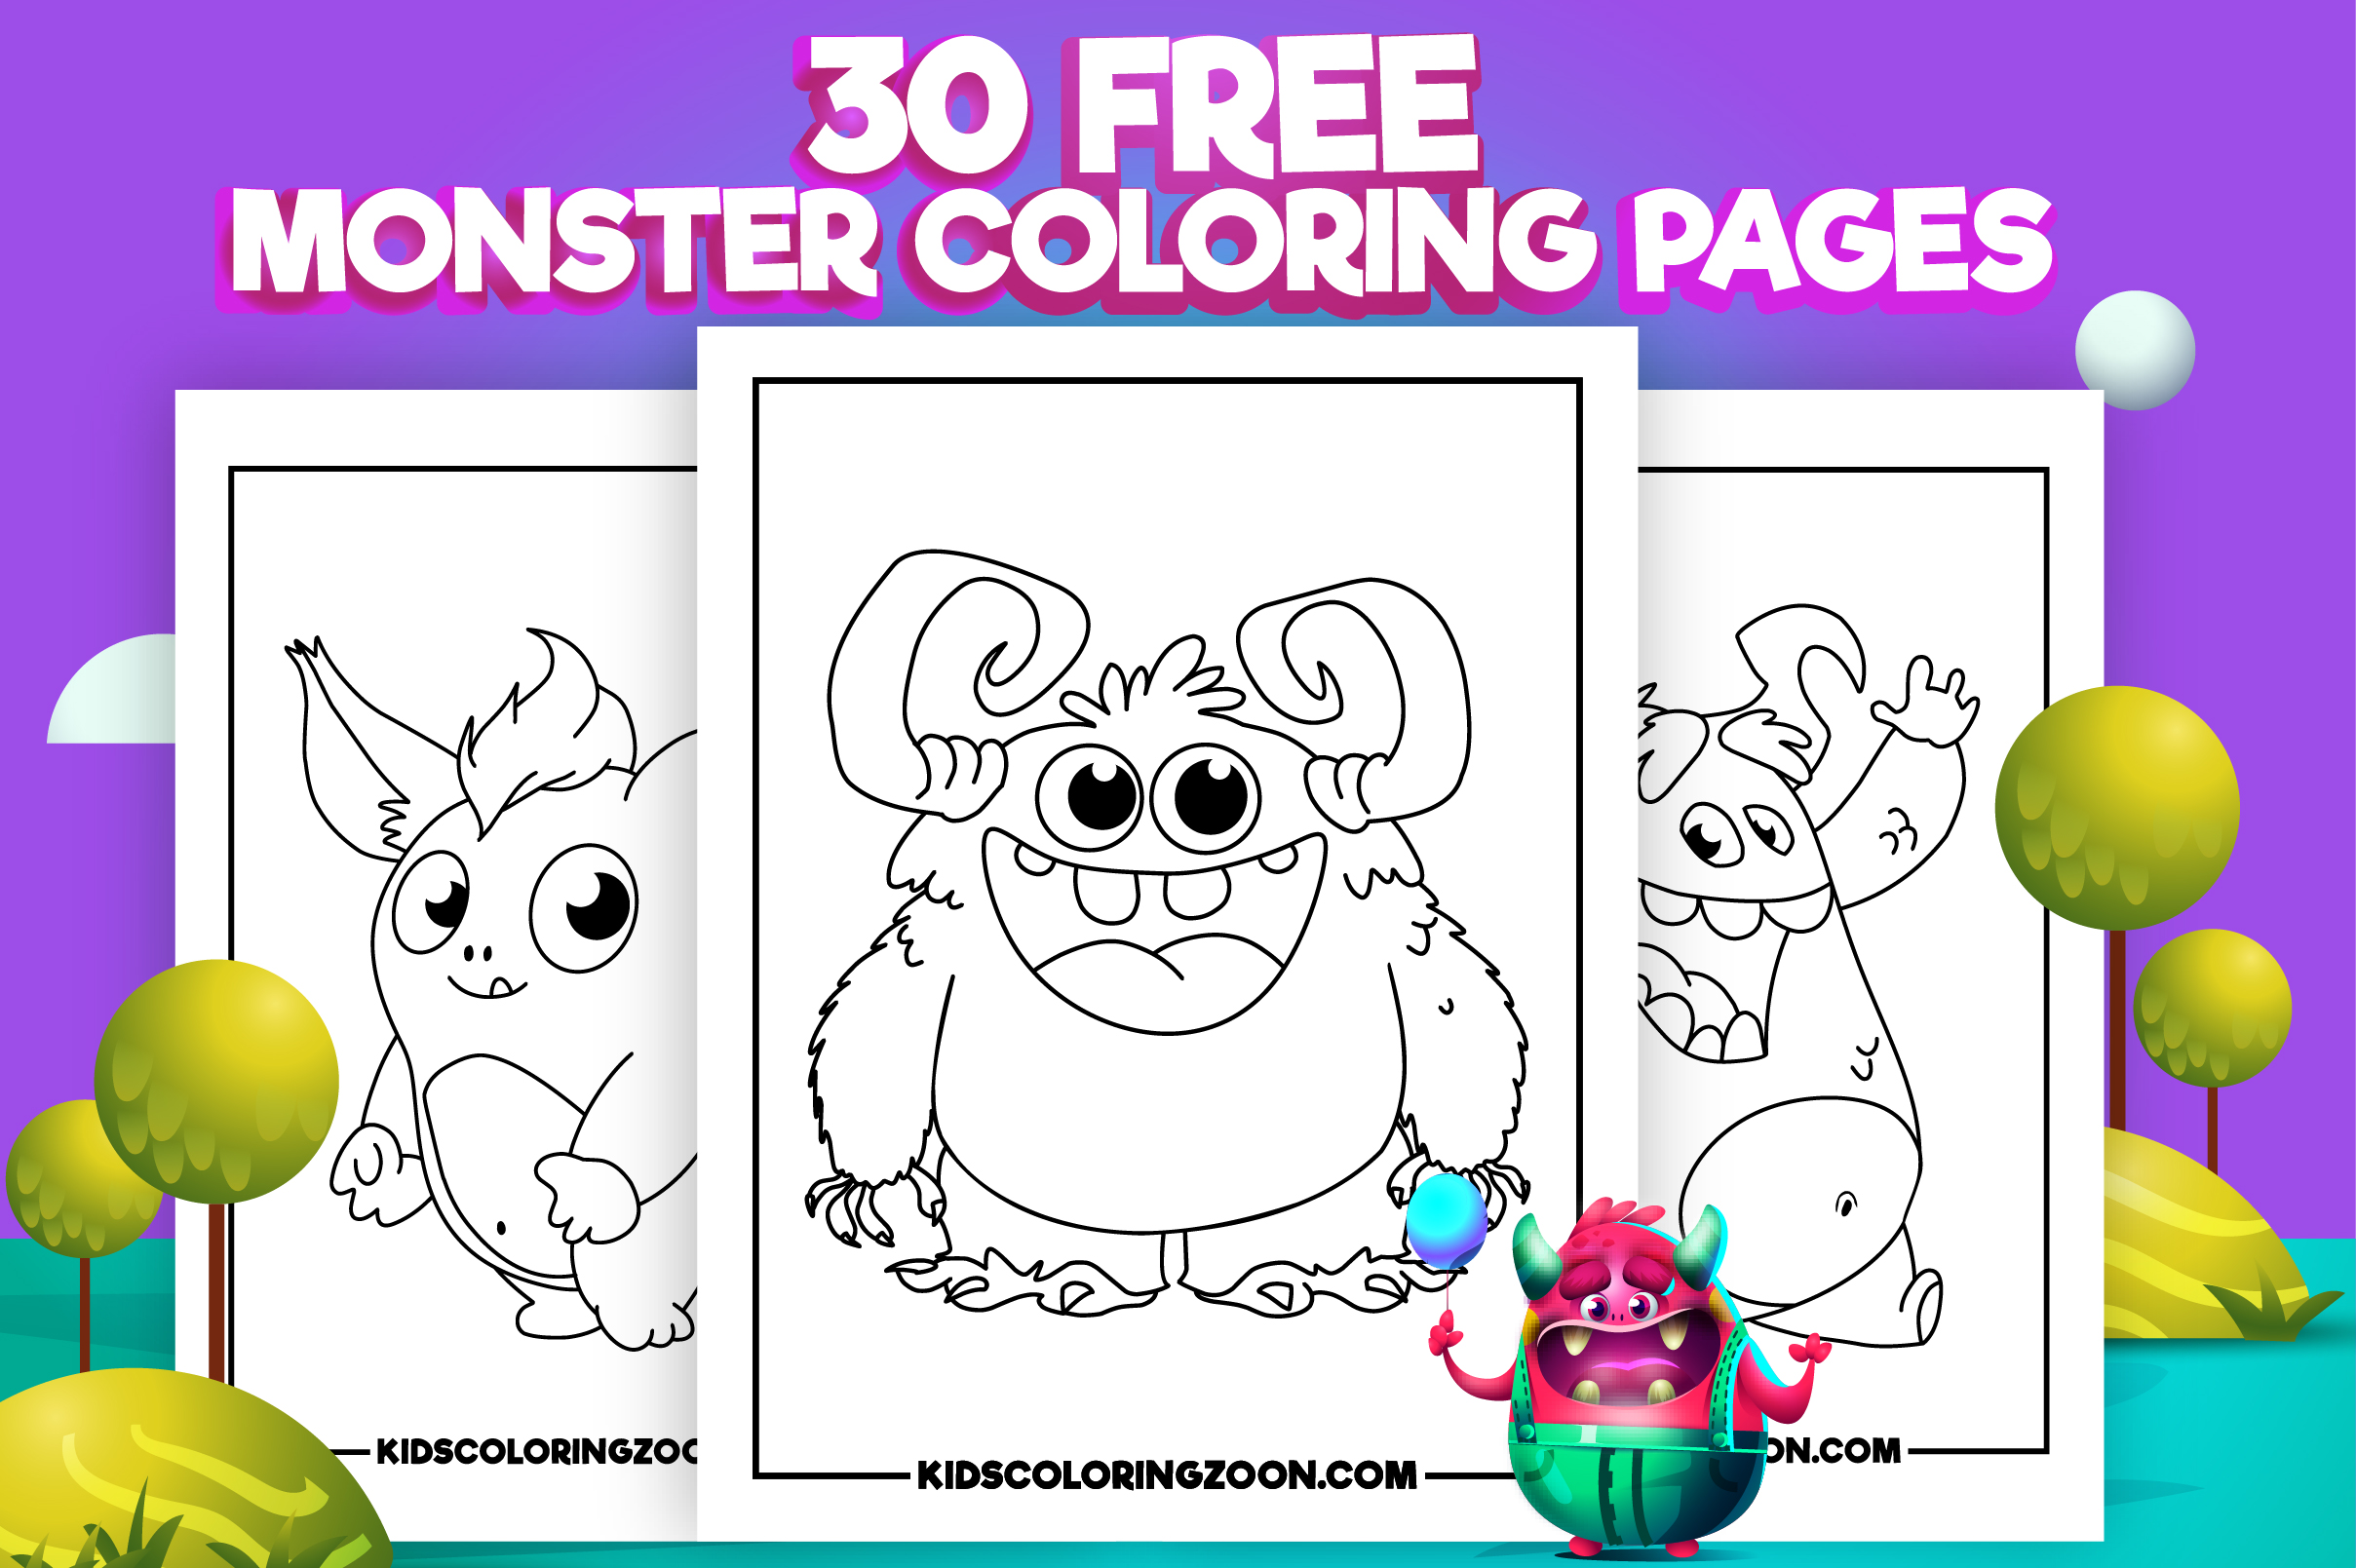 Free Printable Cute Monster Coloring Pages For Kids - Free Coloring Pages PDF